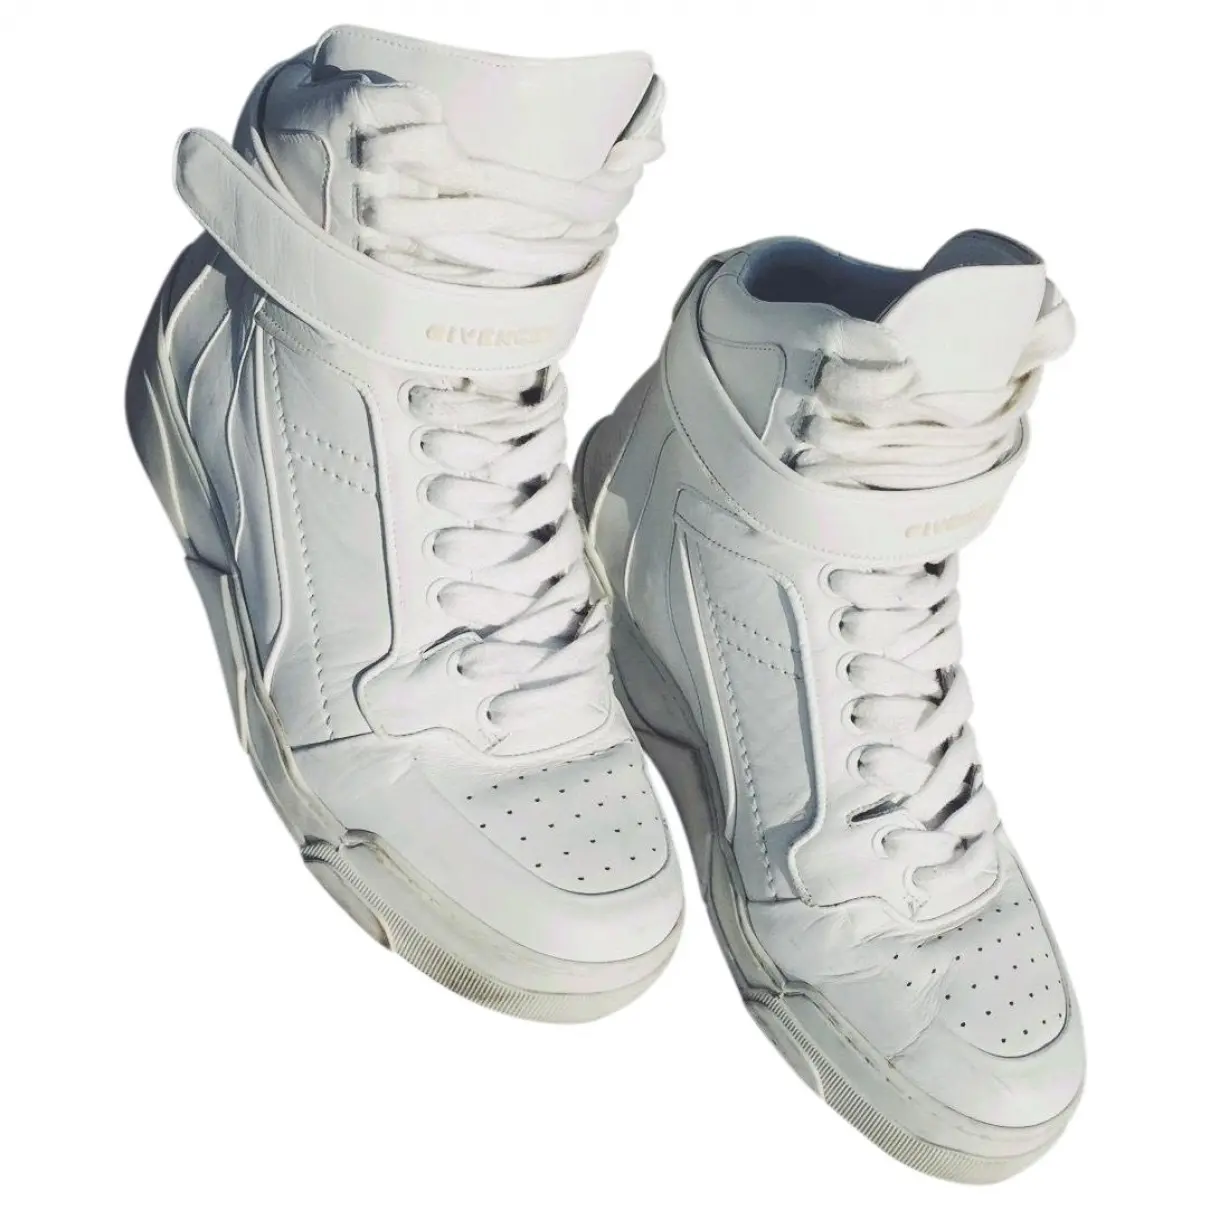 Givenchy Tyson High Classic White Givenchy